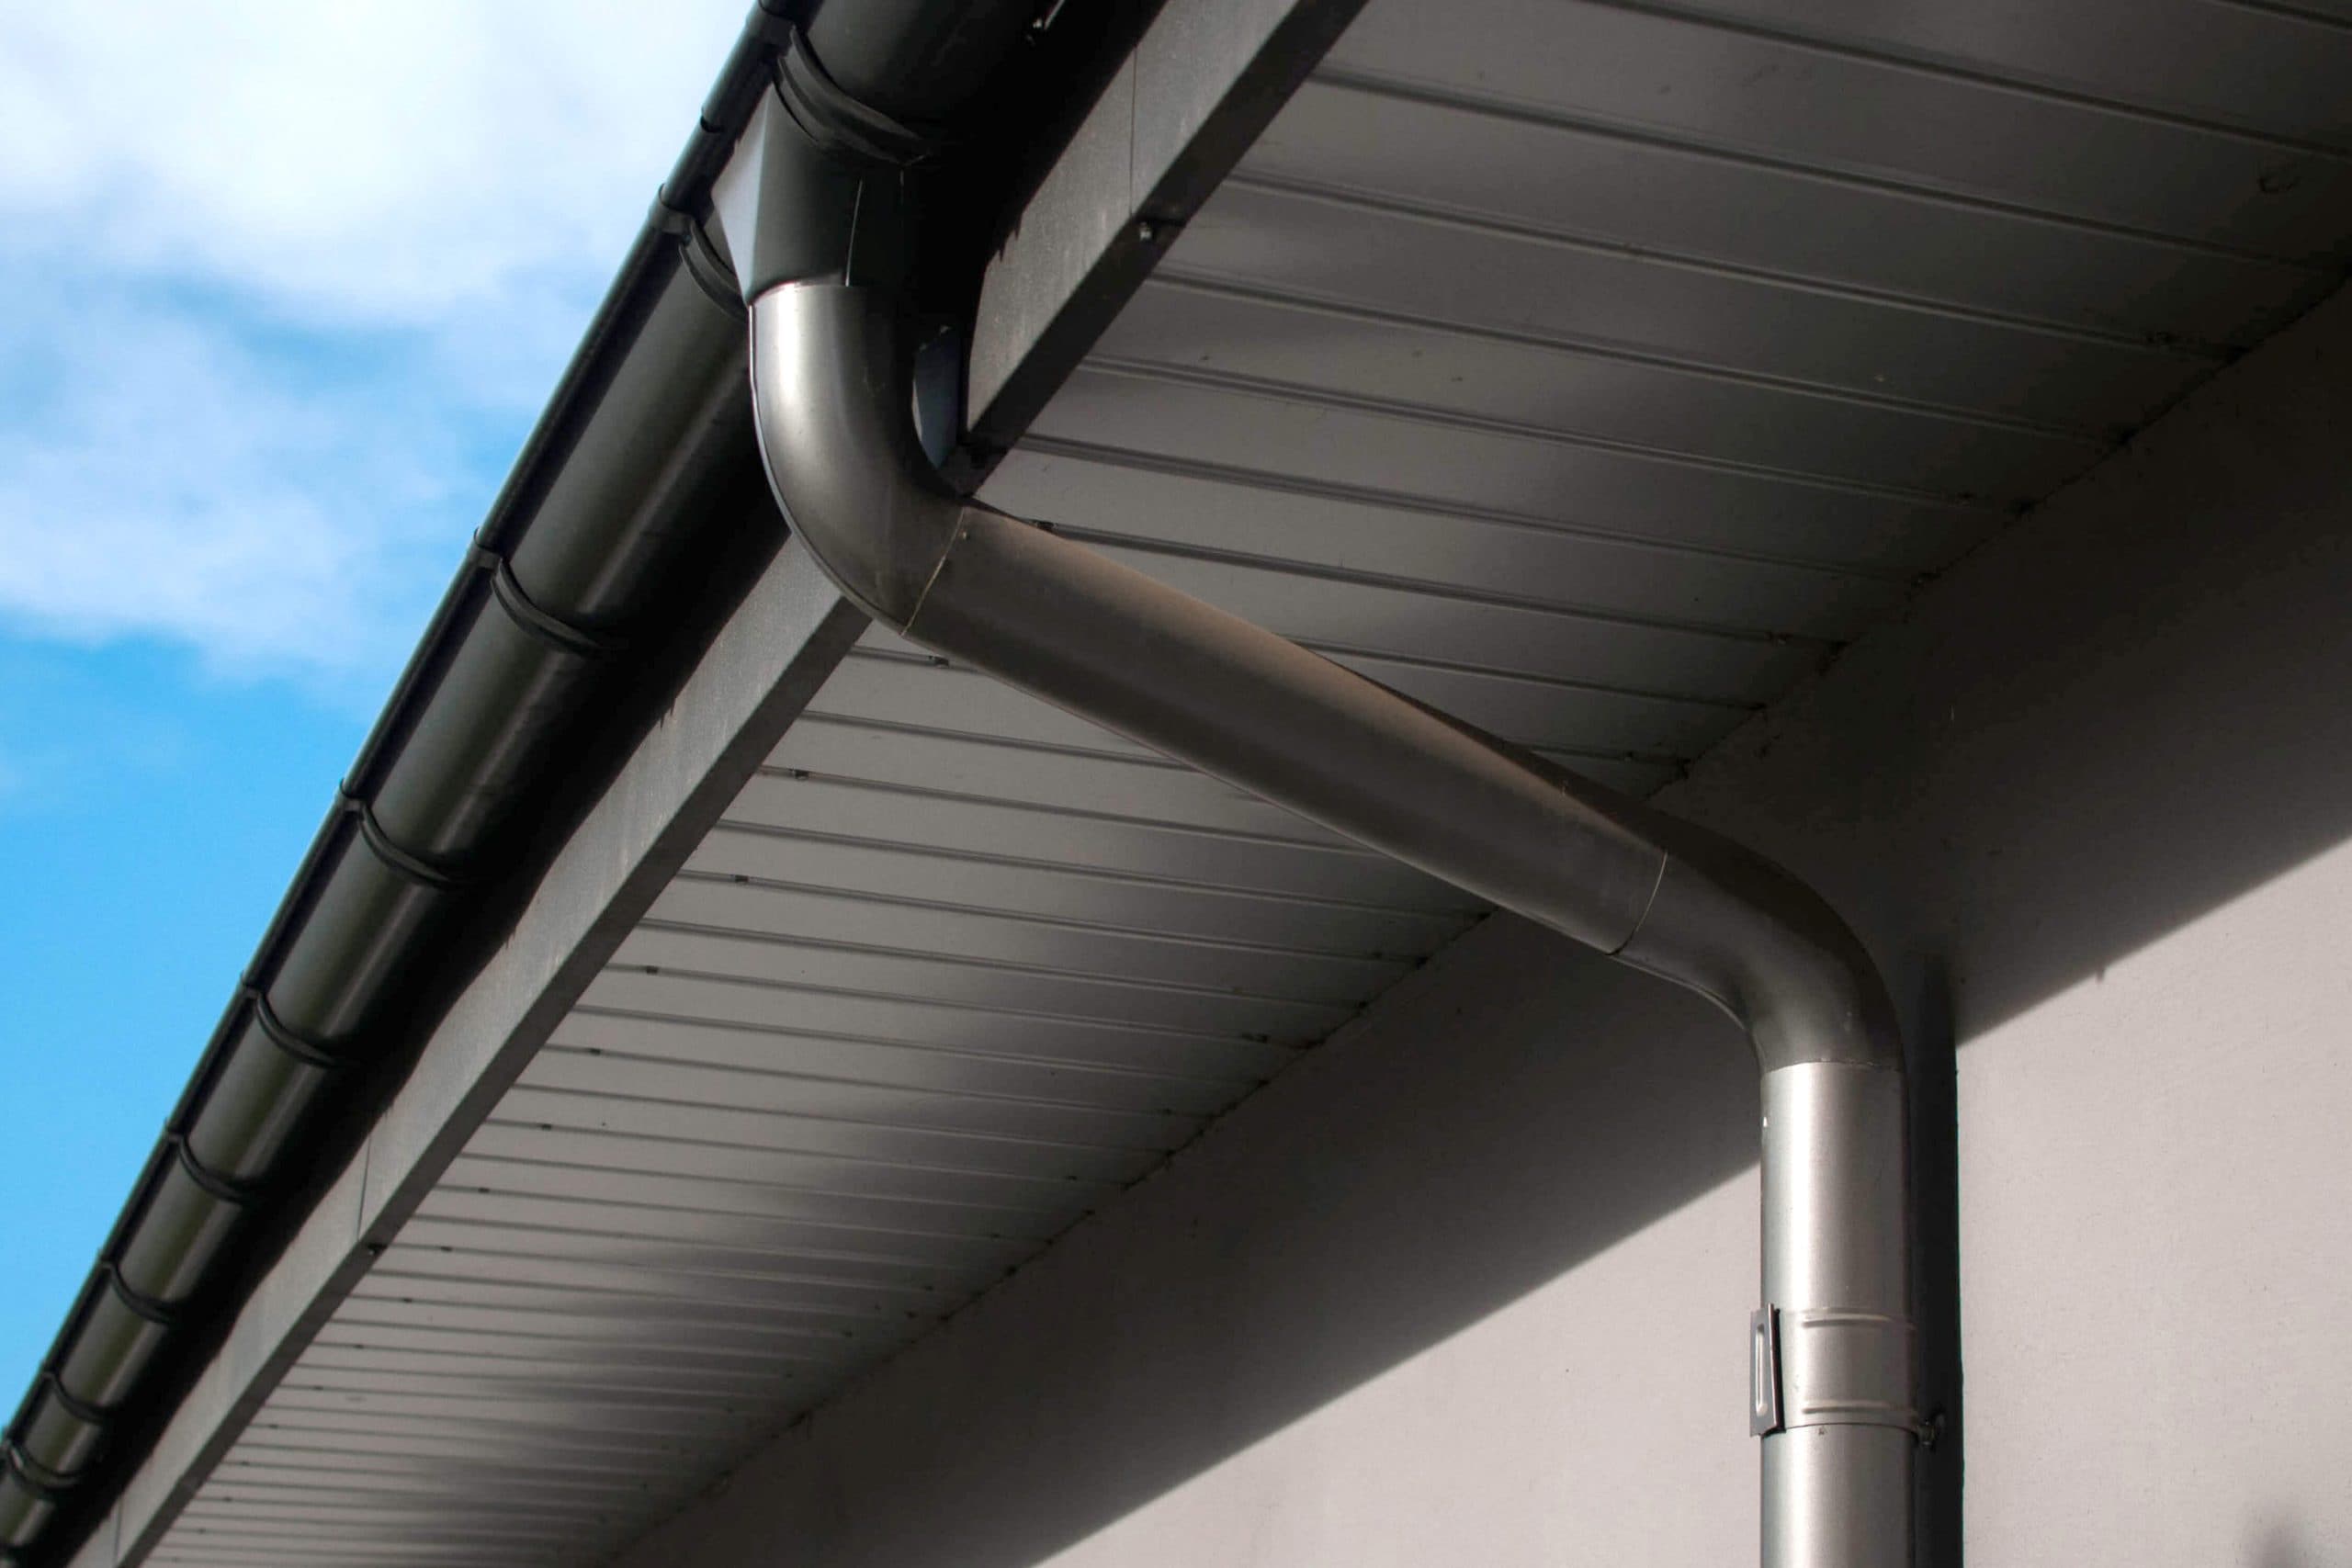 Reliable and affordable Galvanized gutters installation in Midlothian